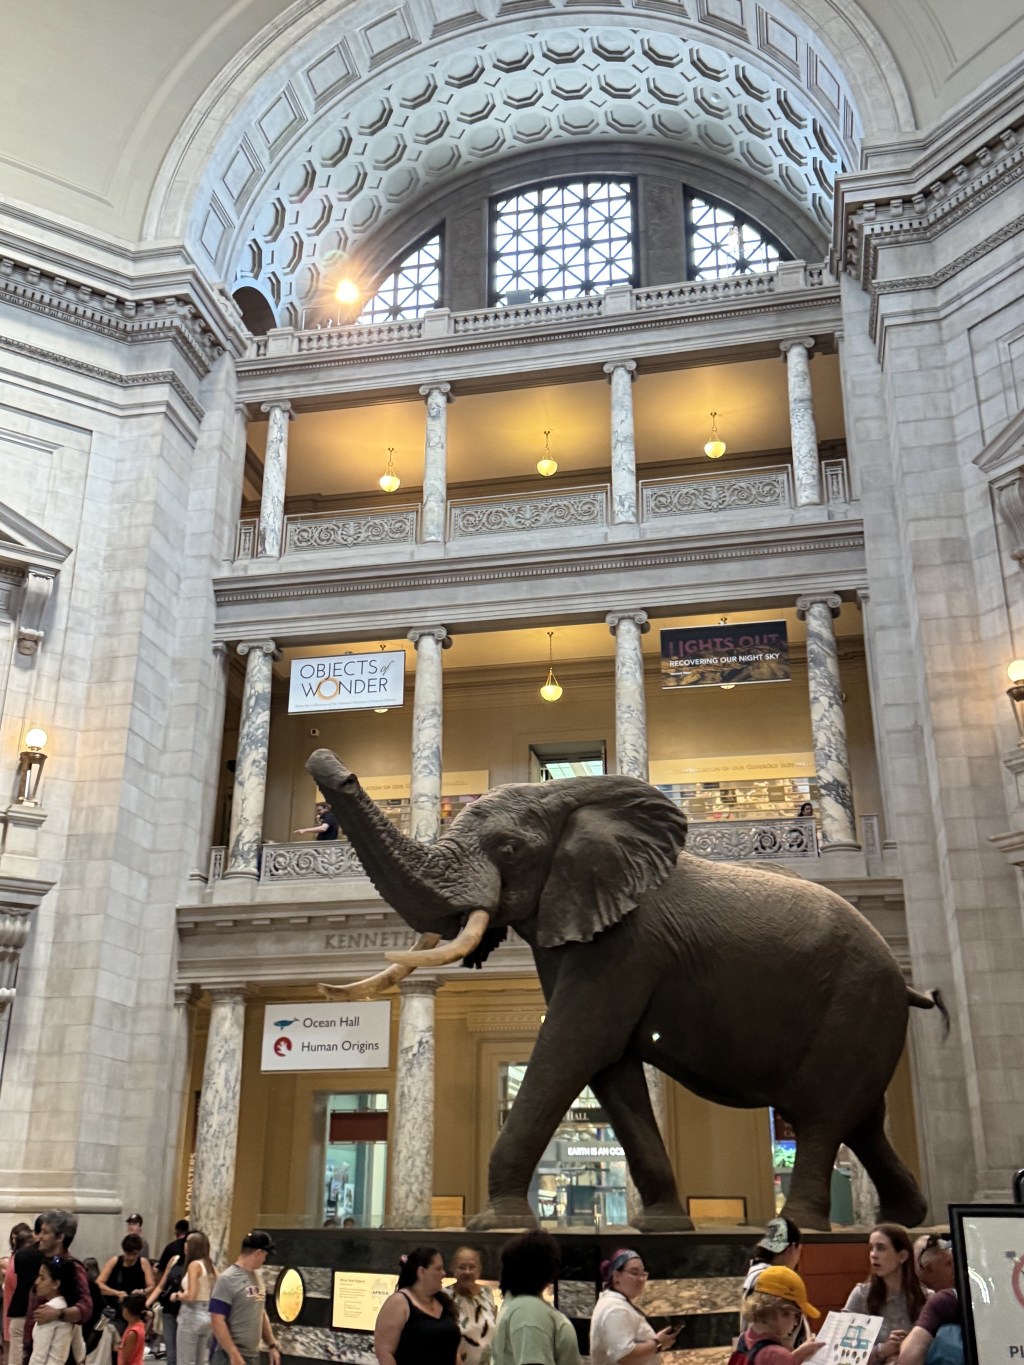 Elephant and architecture